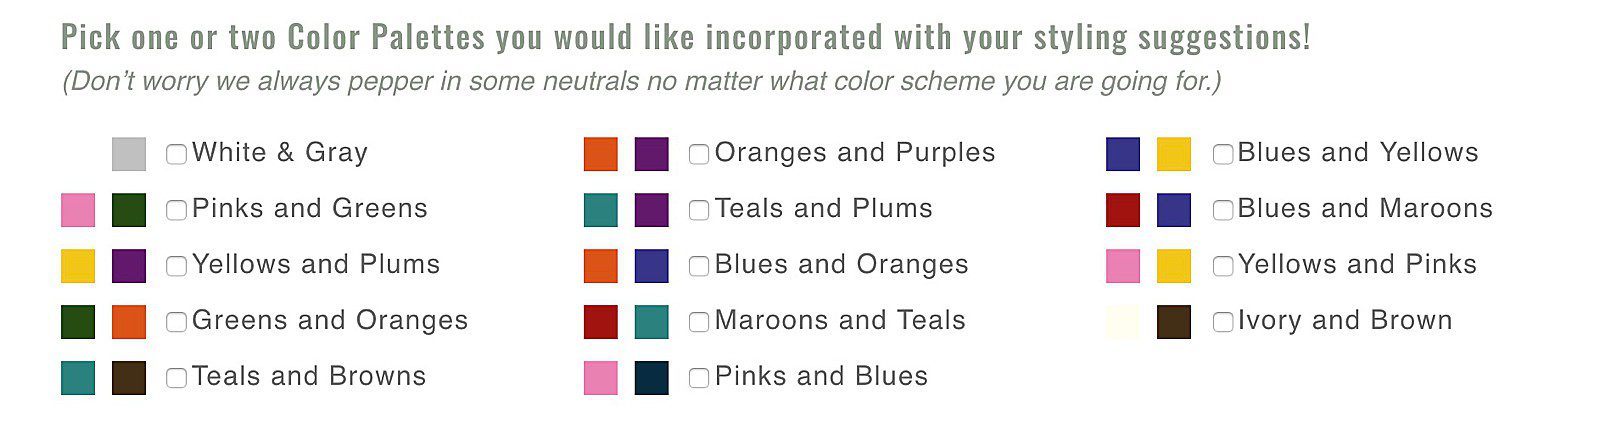 color palettes for family portrait styling